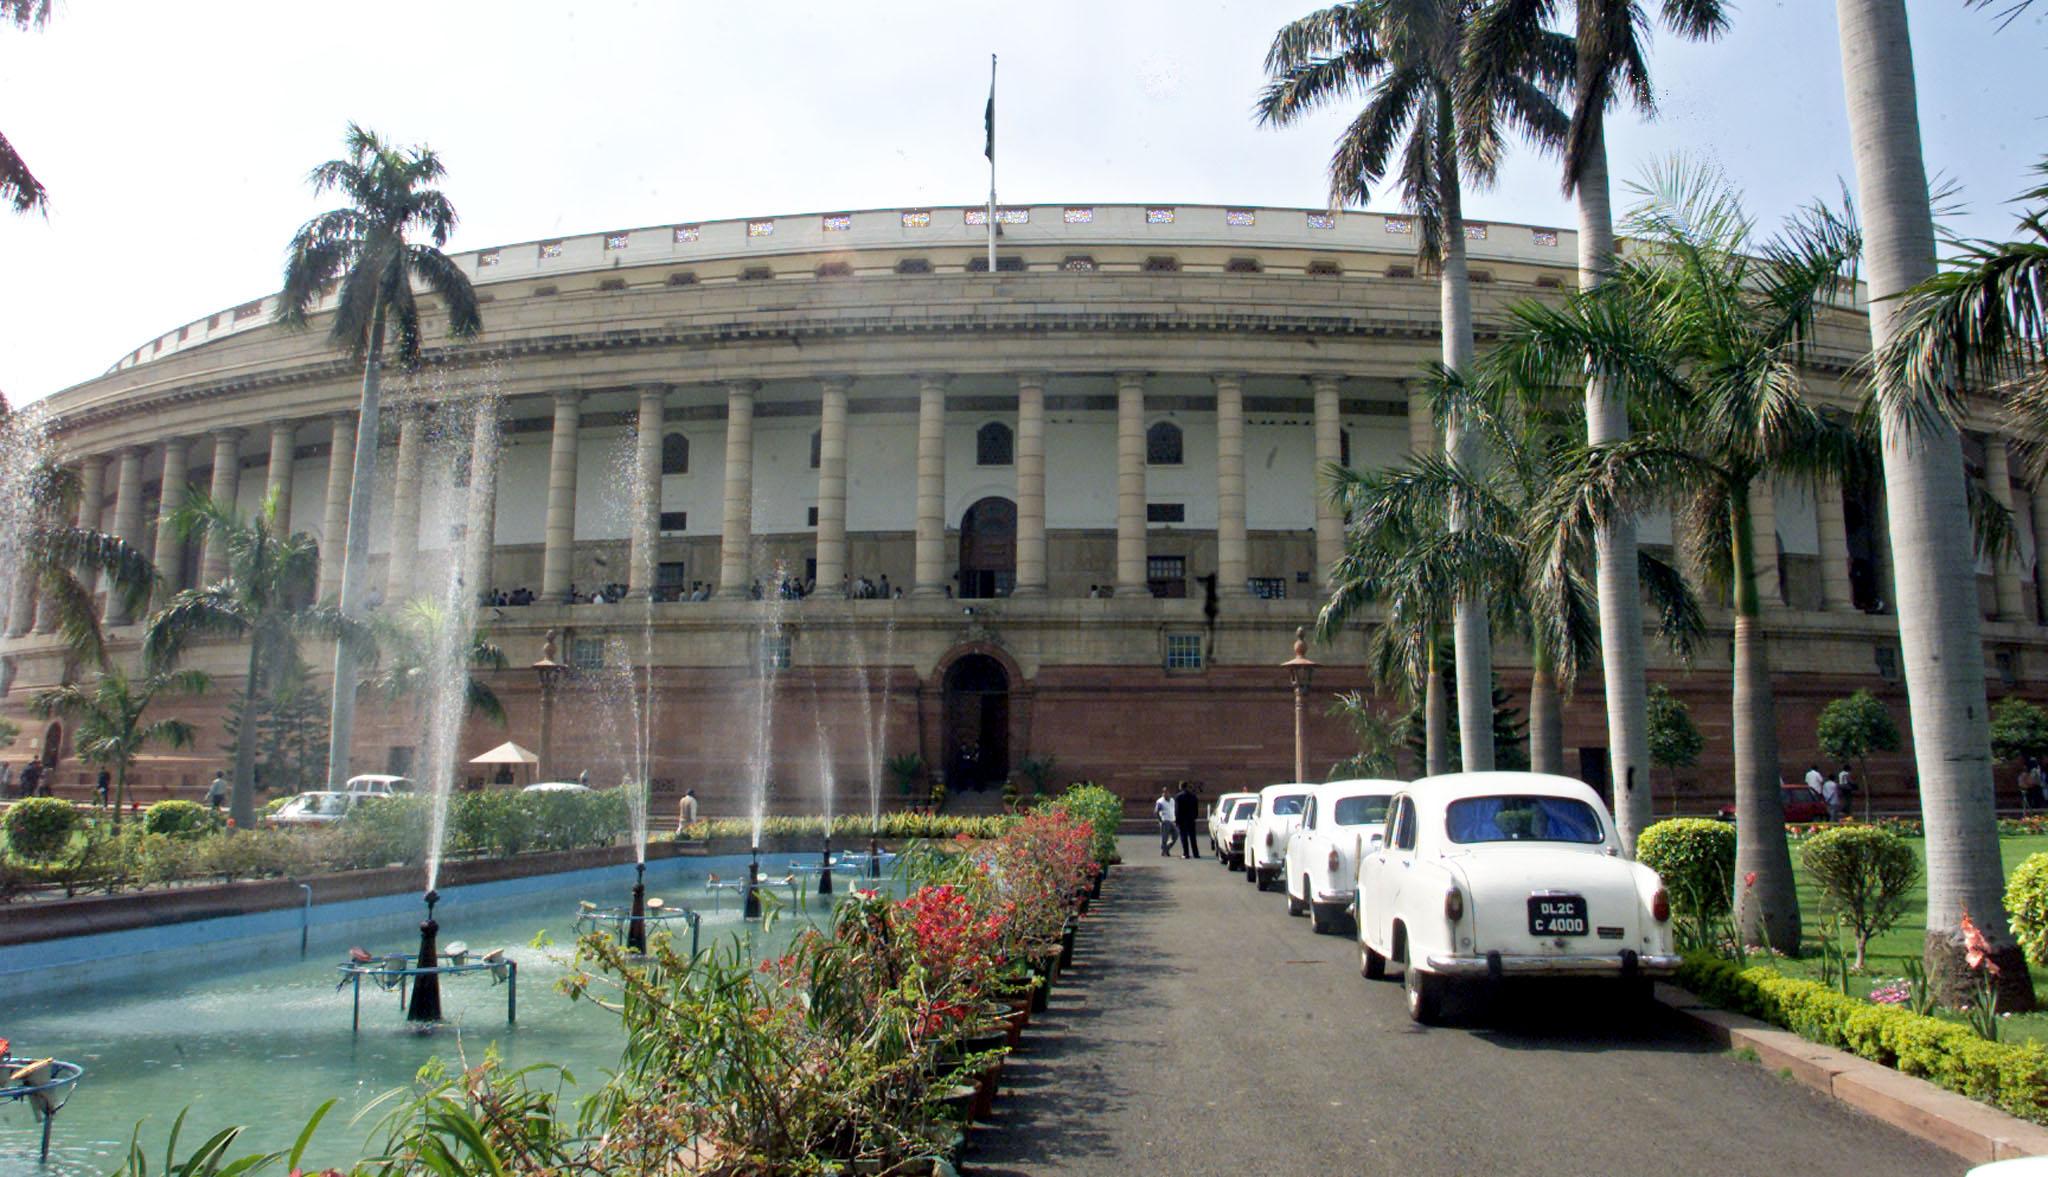 Labour market reform bills to be introduced in monsoon session of Parliament